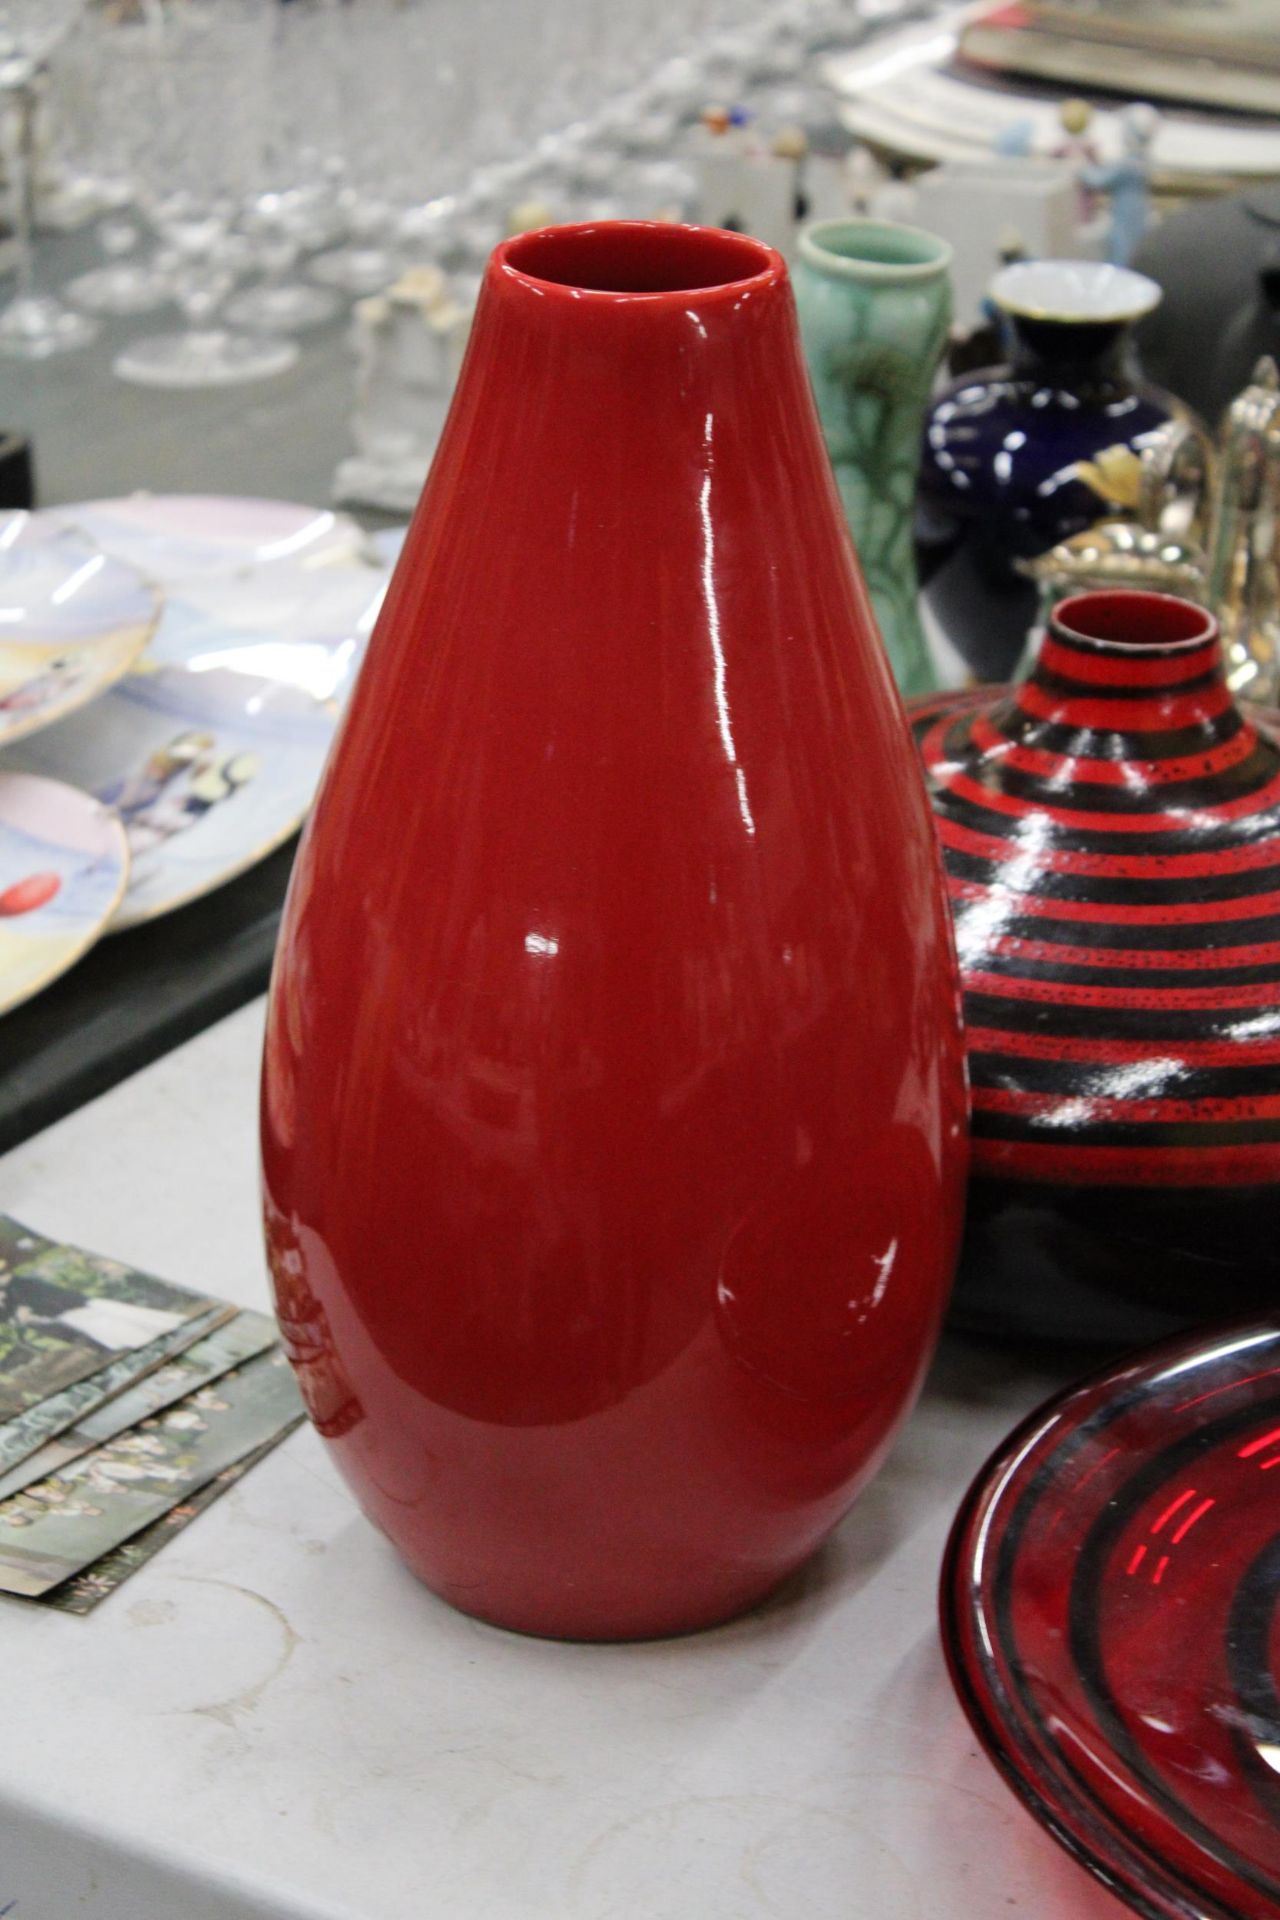 A STRIKING RED AND BLACK STRIPED VASE, RED AND BLACK LARGE GLASS DISH AND A LARGE RED VASE - Image 2 of 5